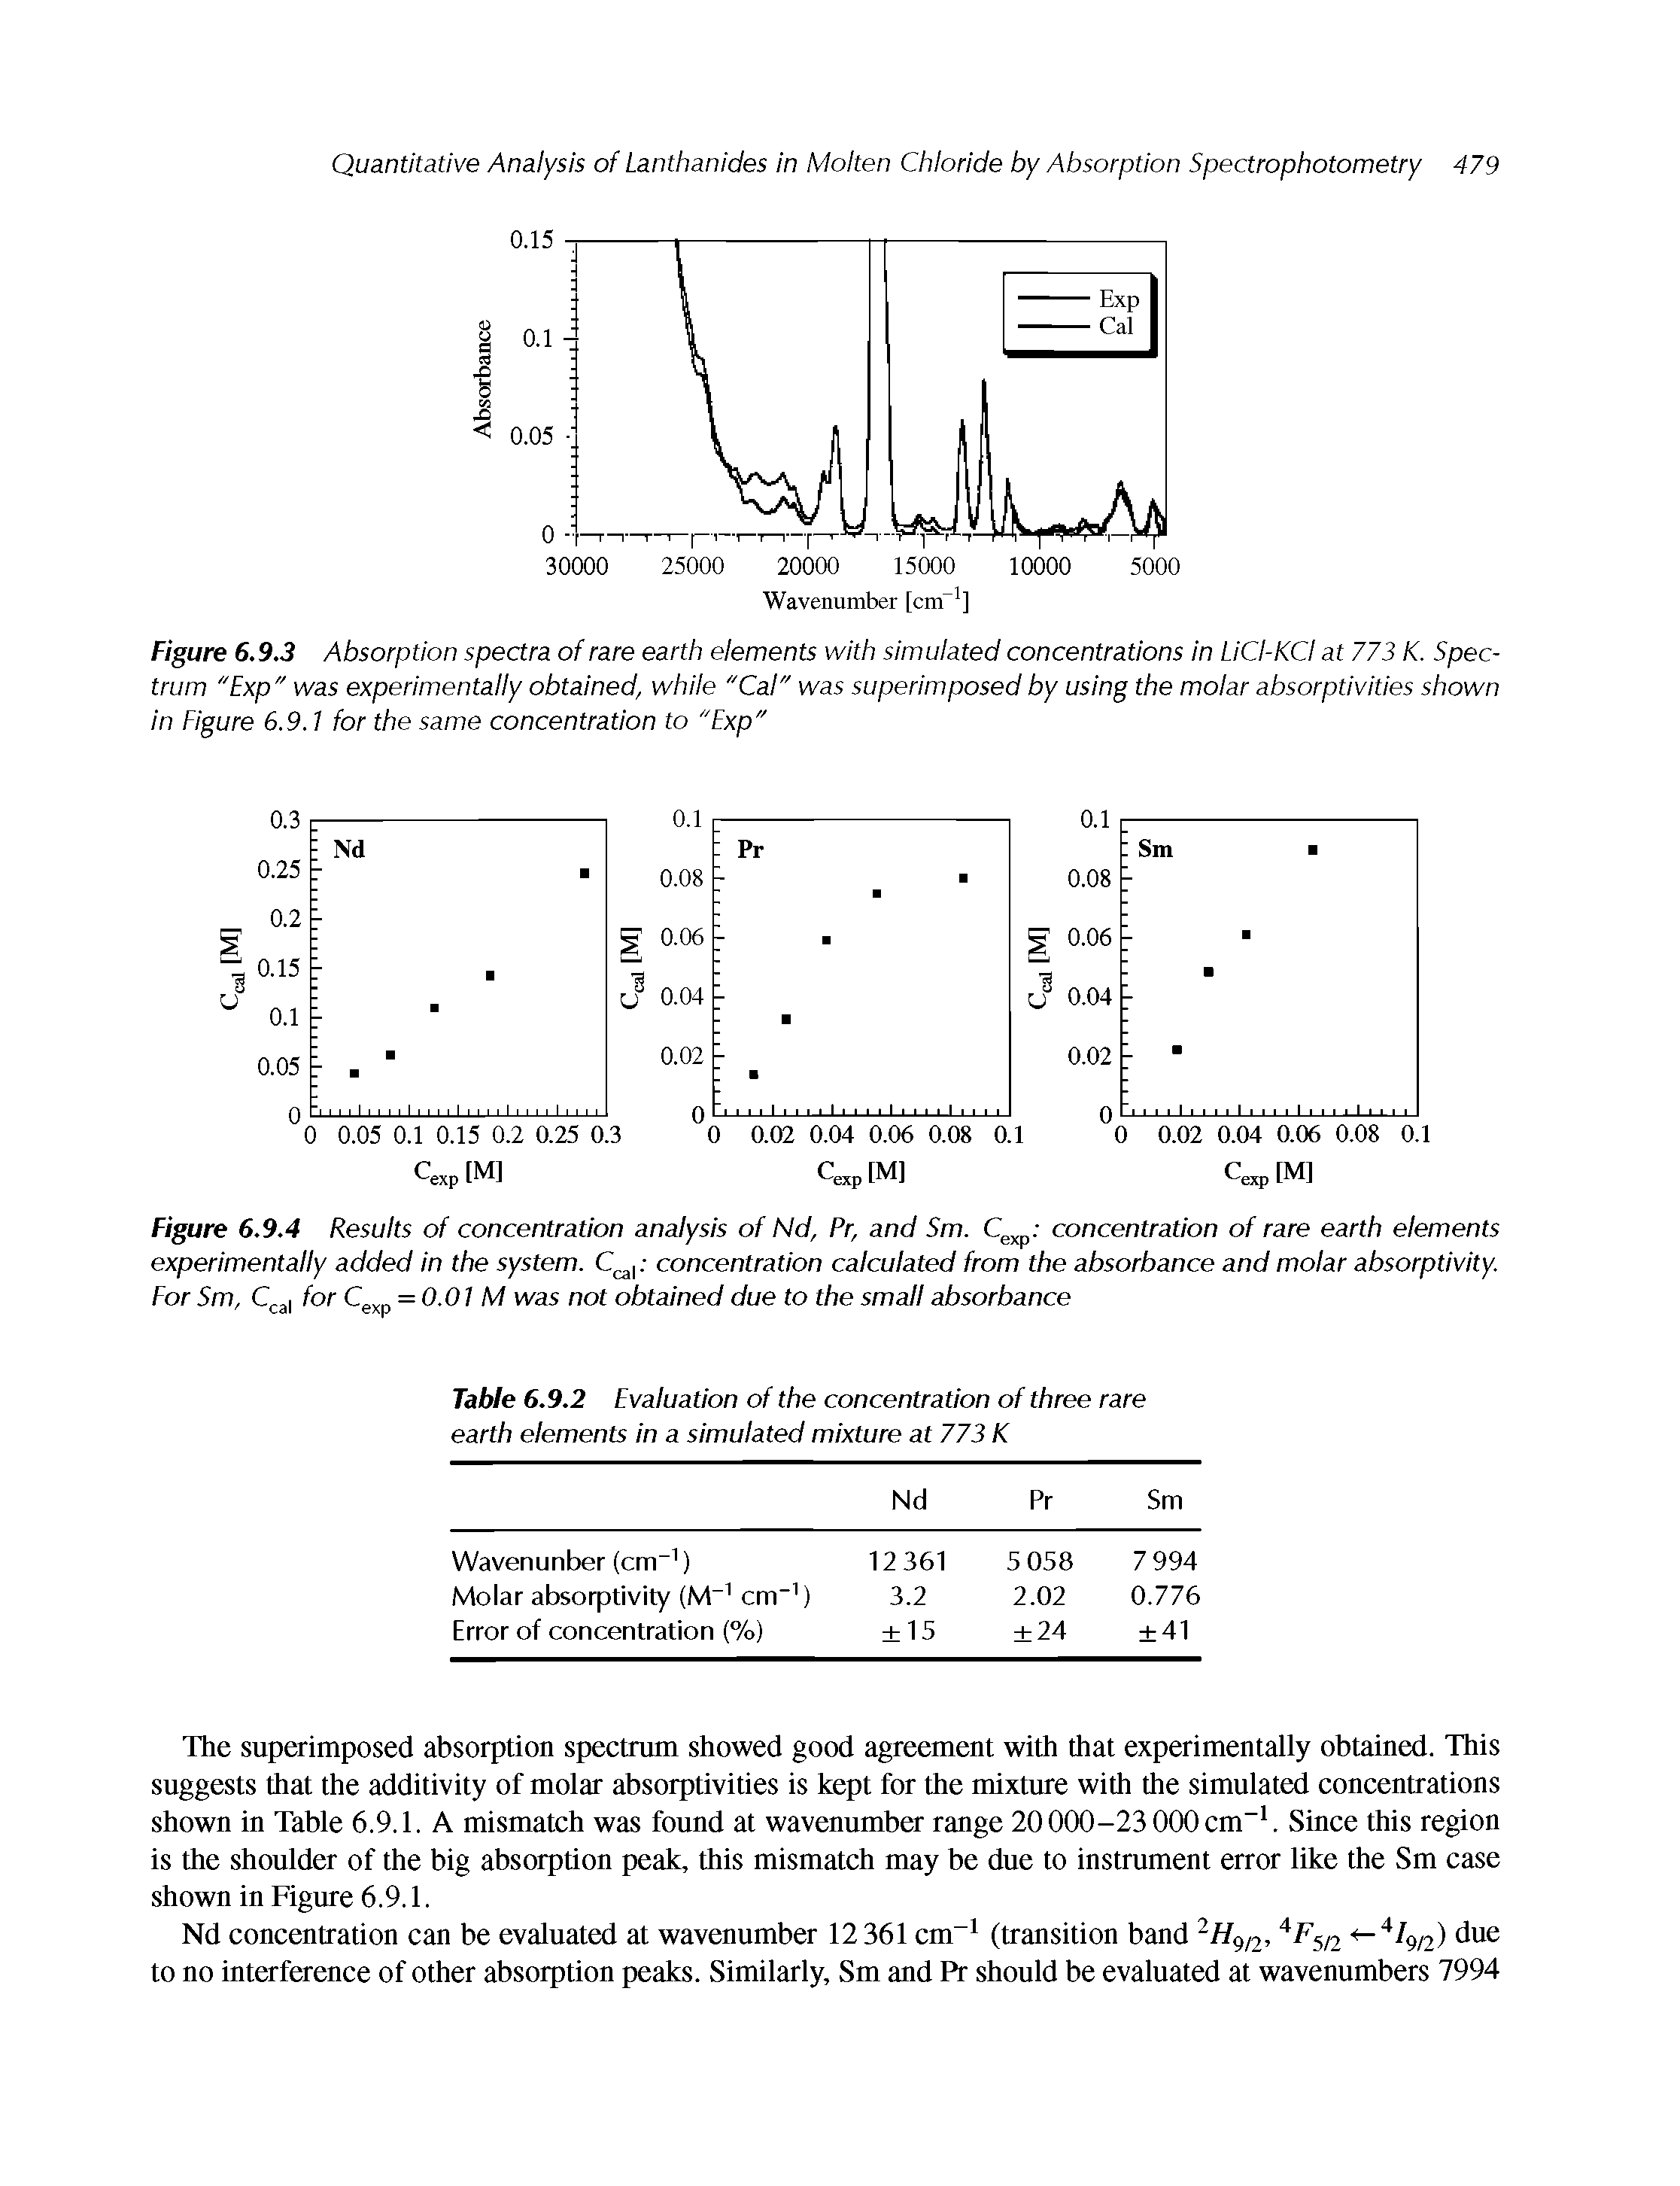 Figure 6.9.4 Results of concentration analysis of Nd, Pr, and Sm. C, concentration of rare earth elements experimentally added in the system. C p concentration calculated from the absorbance and molar absorptivity. For Sm, Qji for C =0.01 M was not obtained due to the small absorbance...